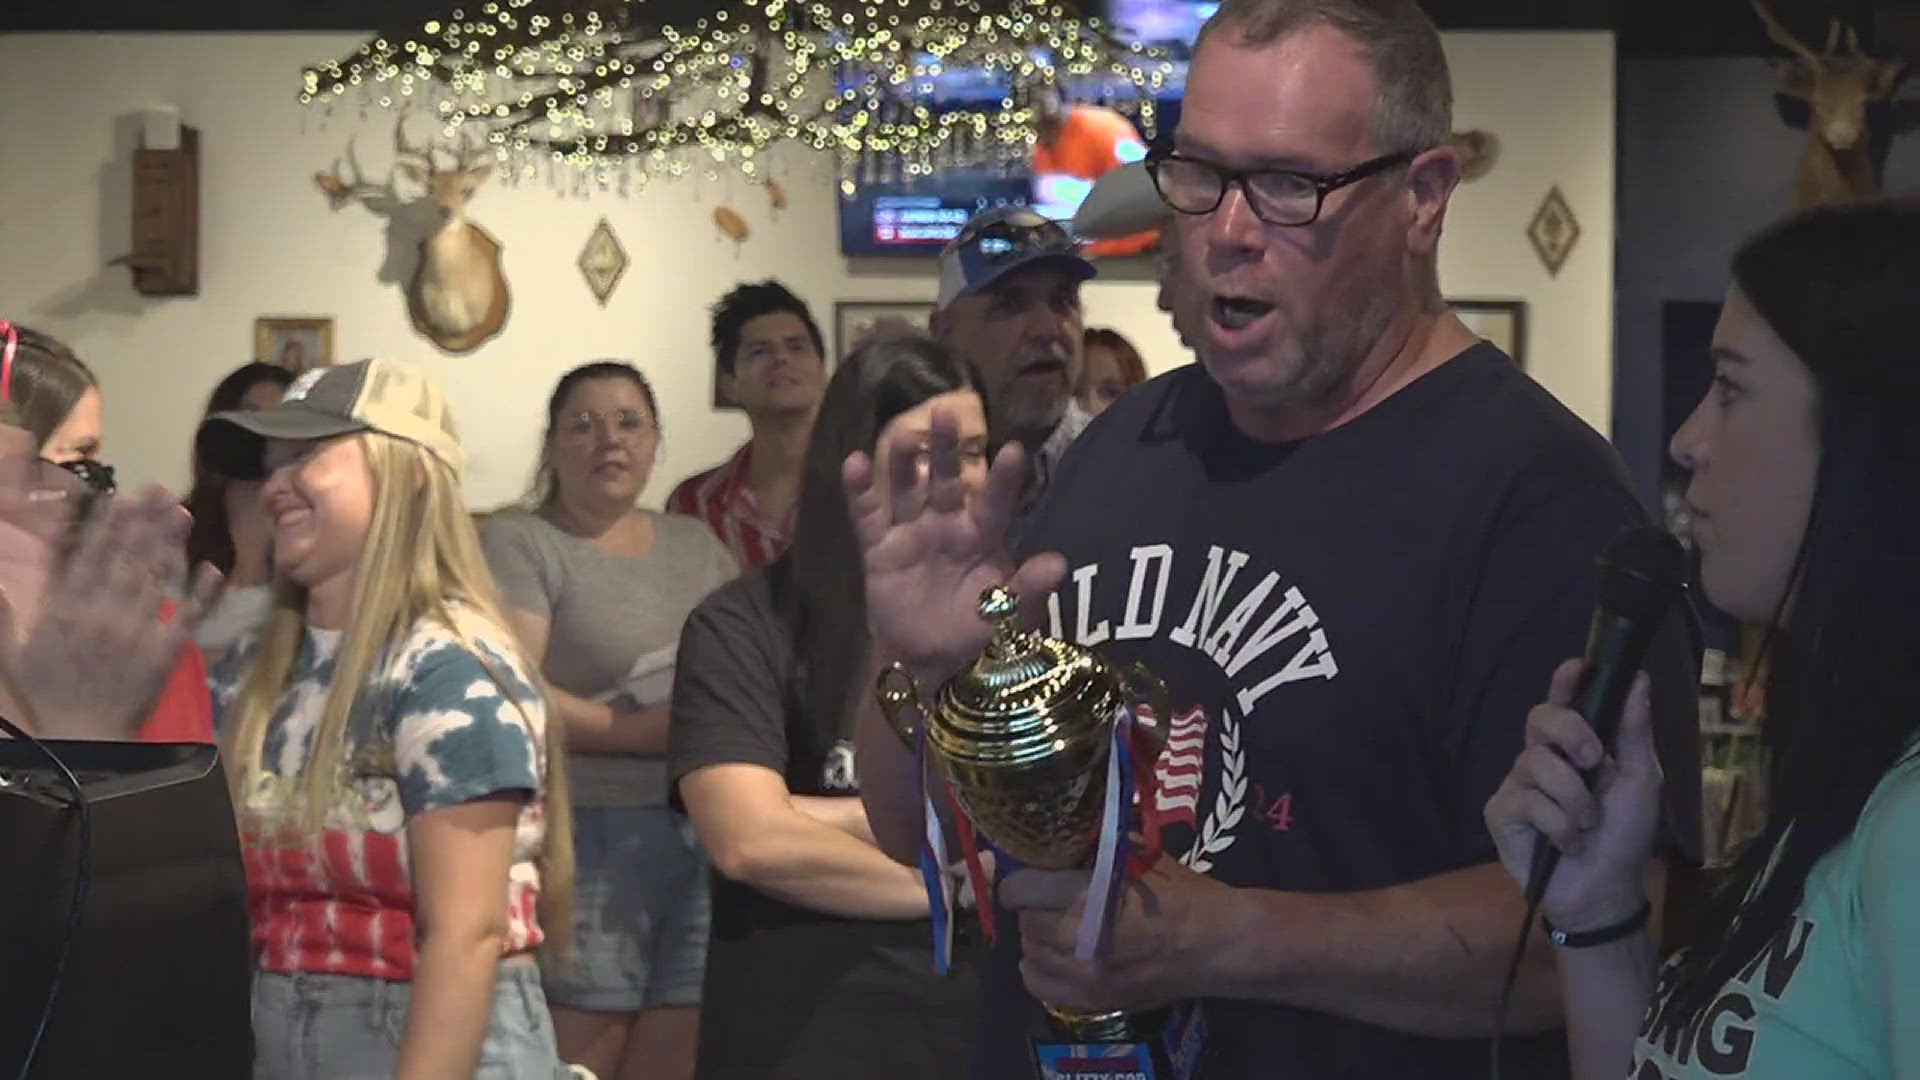 16 contestants showed up to Buckstin Brewing Company in Beaumont to prove they could chow-down and eat the most hotdogs in the shortest amount of time.